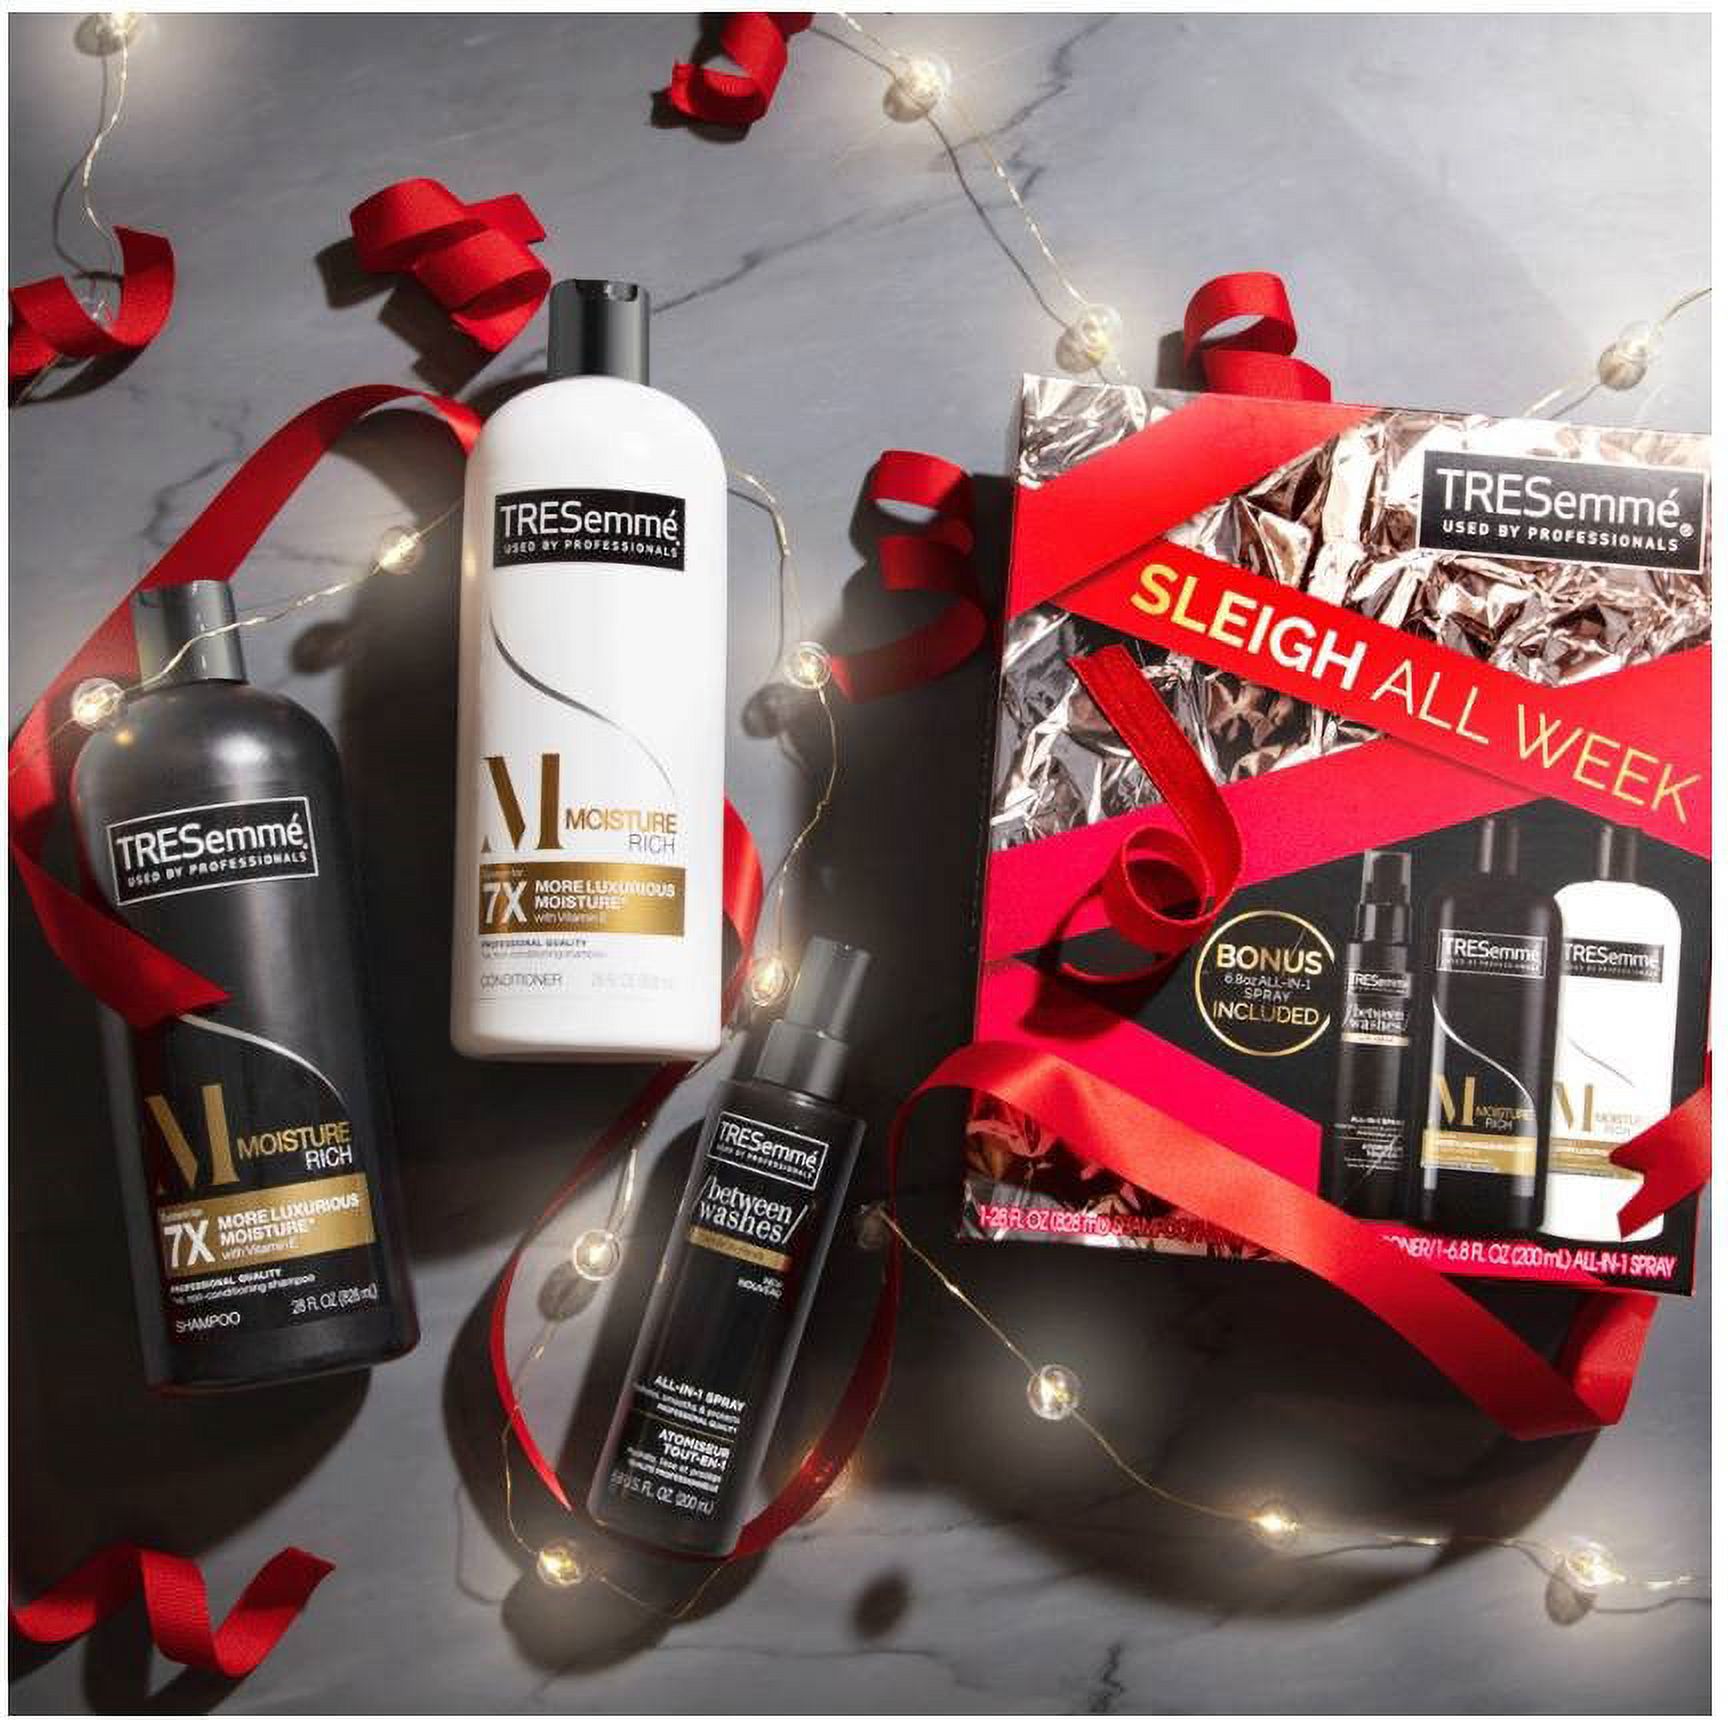 ($13 Value) TRESemme 3-Piece Moisture Rich Gift Set with Shampoo, Conditioner, and All-In-One Styling Spray - image 2 of 10